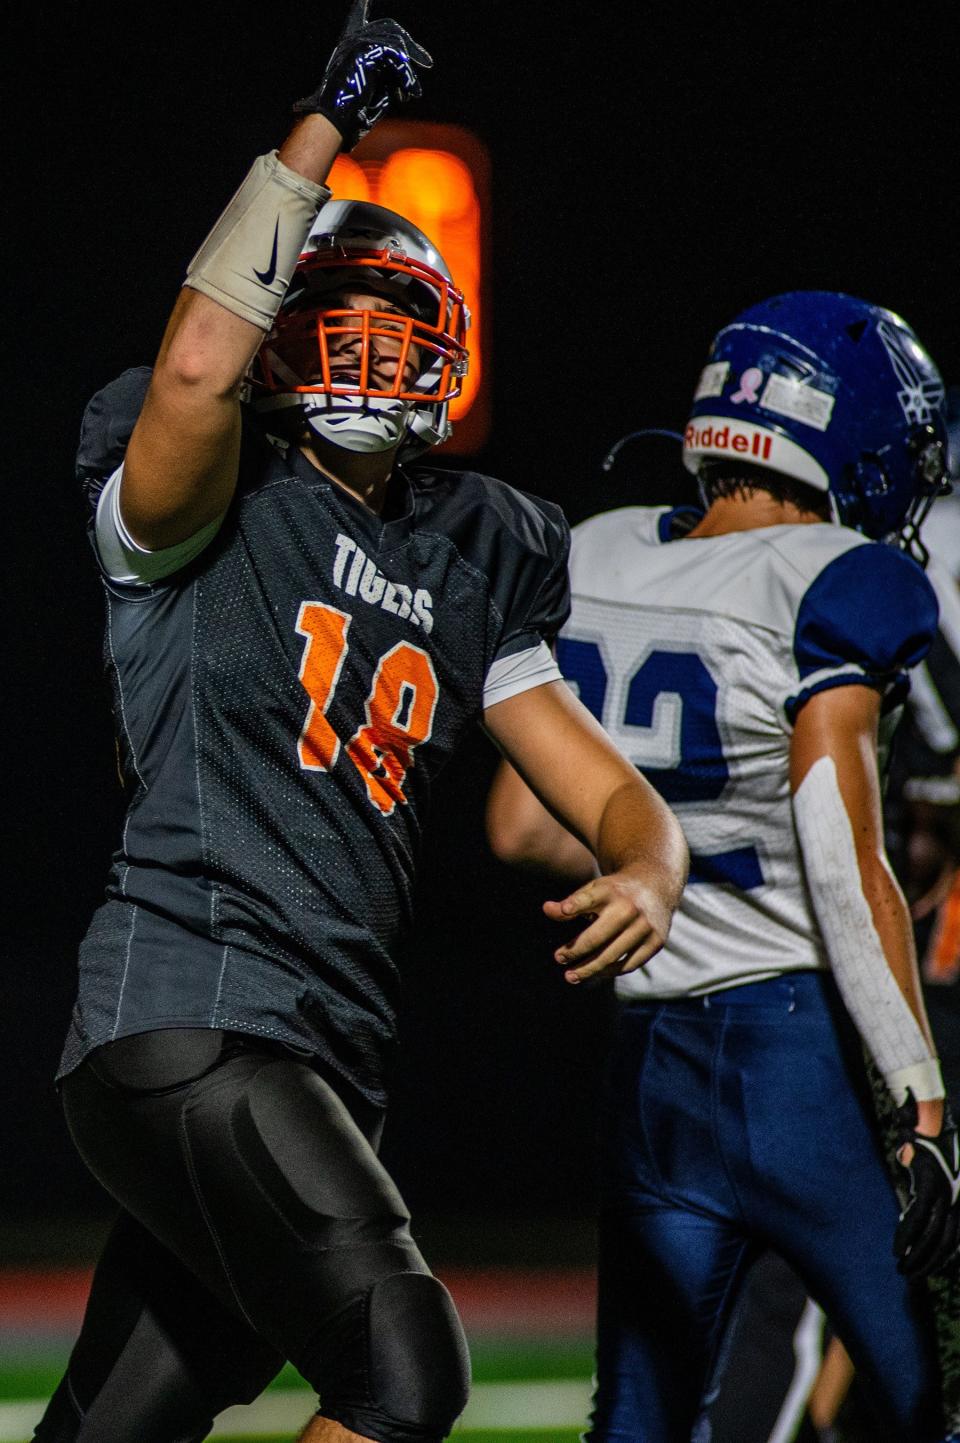 Pawling's Brett Clowry points to the sky after scoring a touchdown during an Oct. 6, 2023 football game against Pine Plains/Rhinebeck. The quarterback paid tribute to George Guerro, a close friend and former schoolmate who died a week earlier.